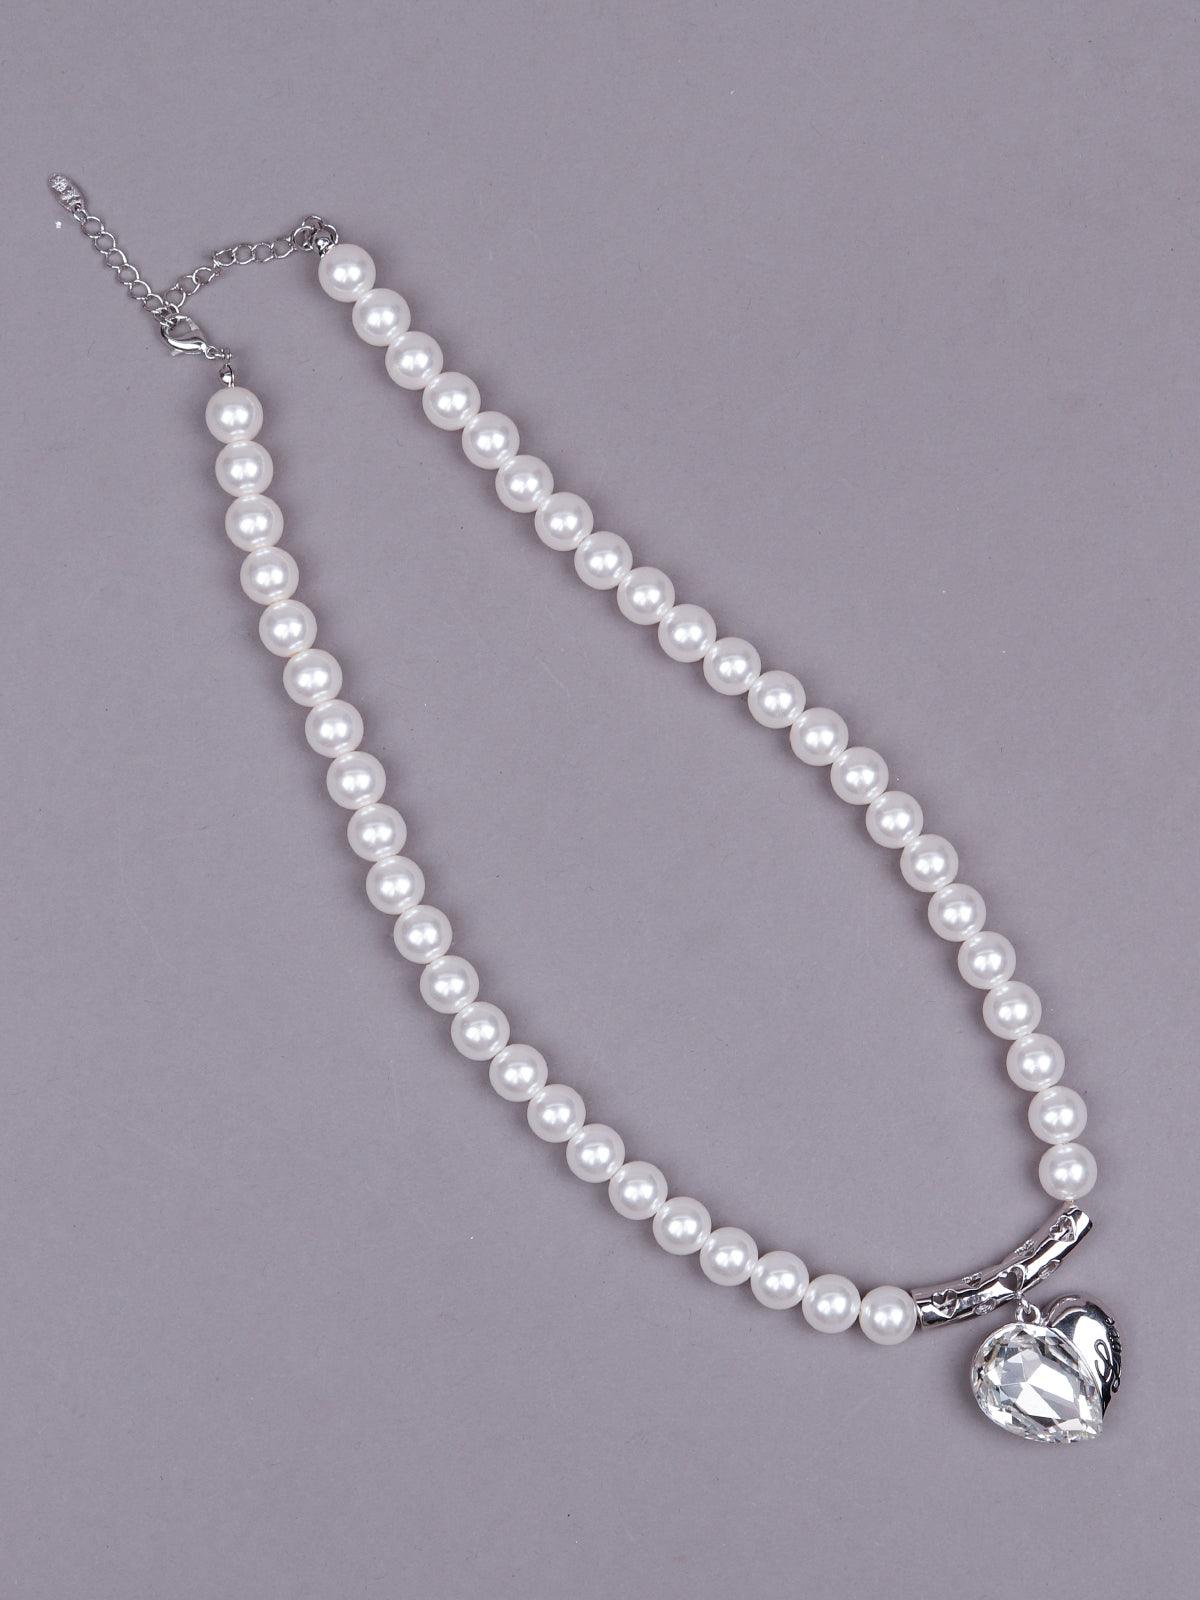 Women's Exquisite Pearl Necklace With A Heart Shape Pendant - Odette